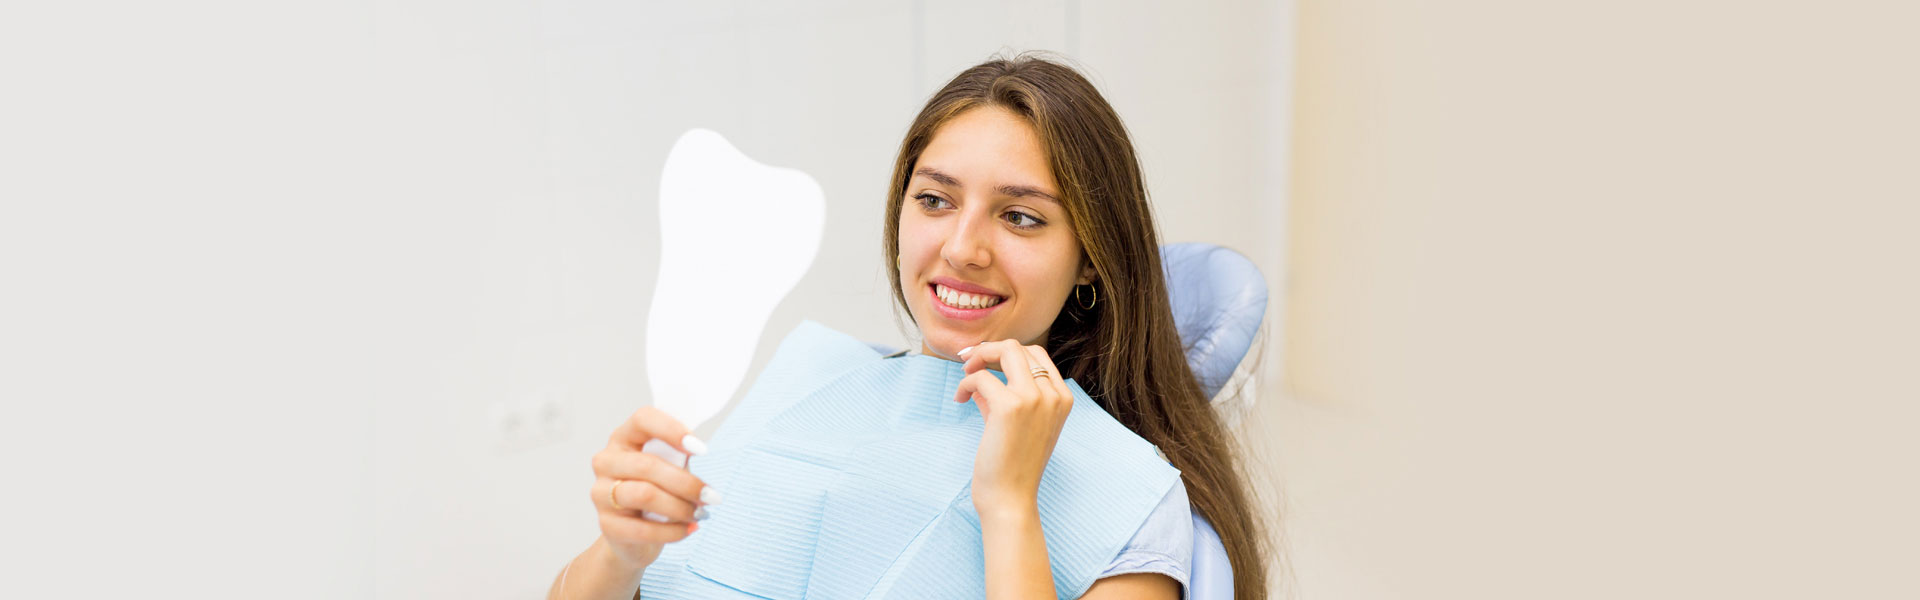 Your Dentist Should Inform You About The Condition Of All Your Teeth, Even The Healthy Ones